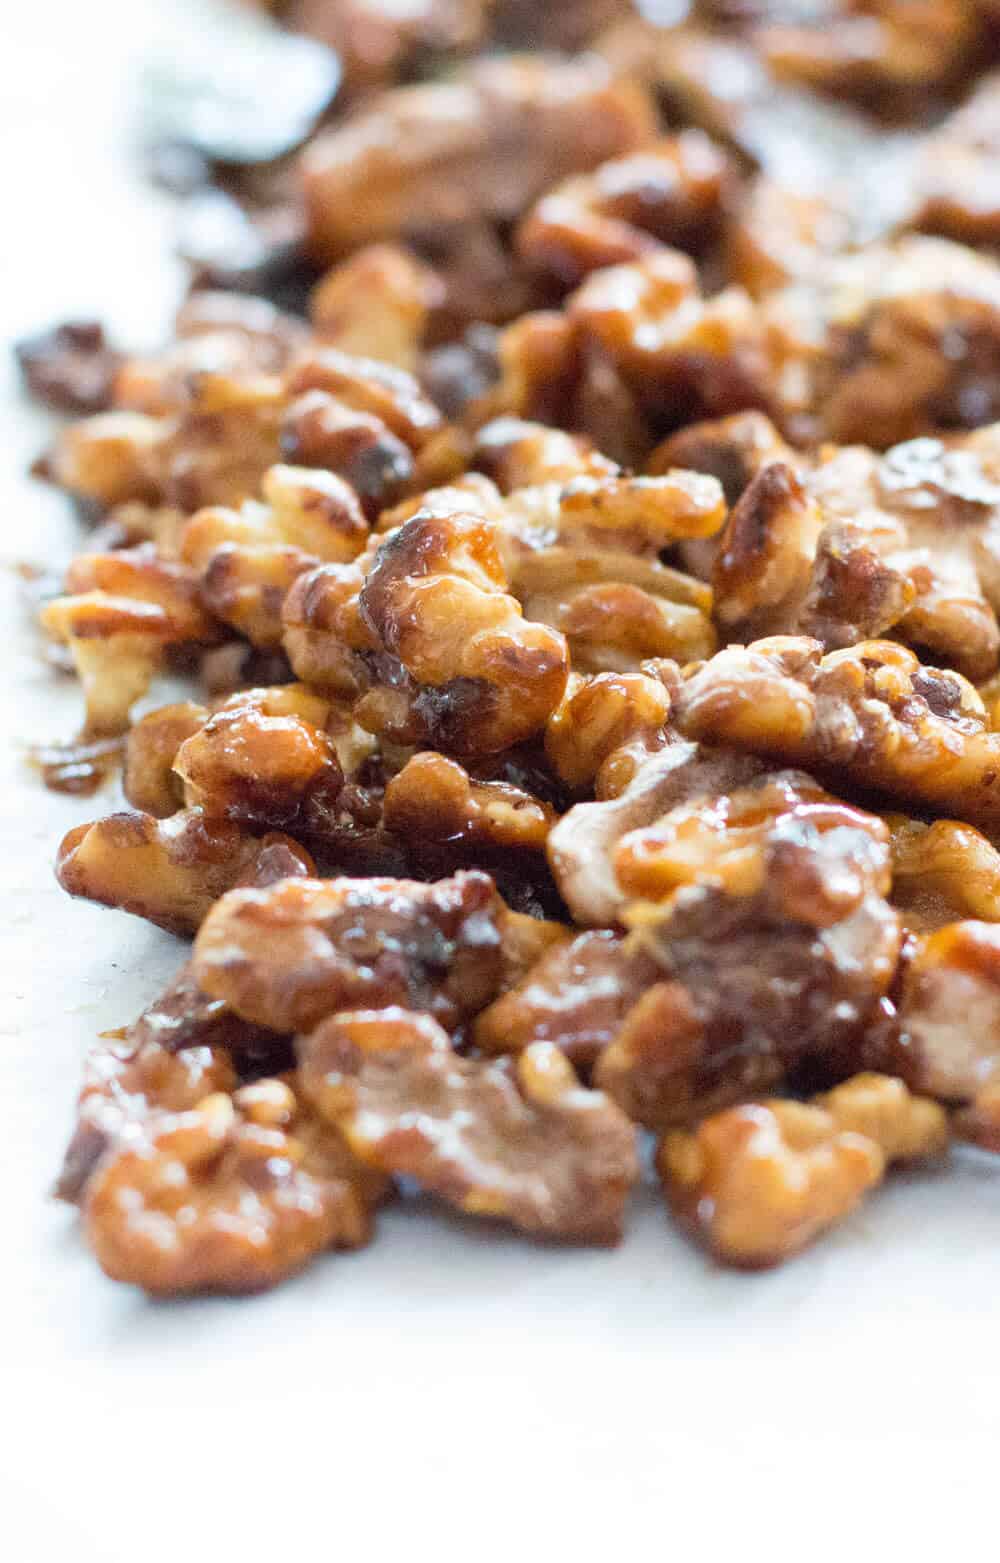 Stovetop candied walnuts cooled on parchment paper